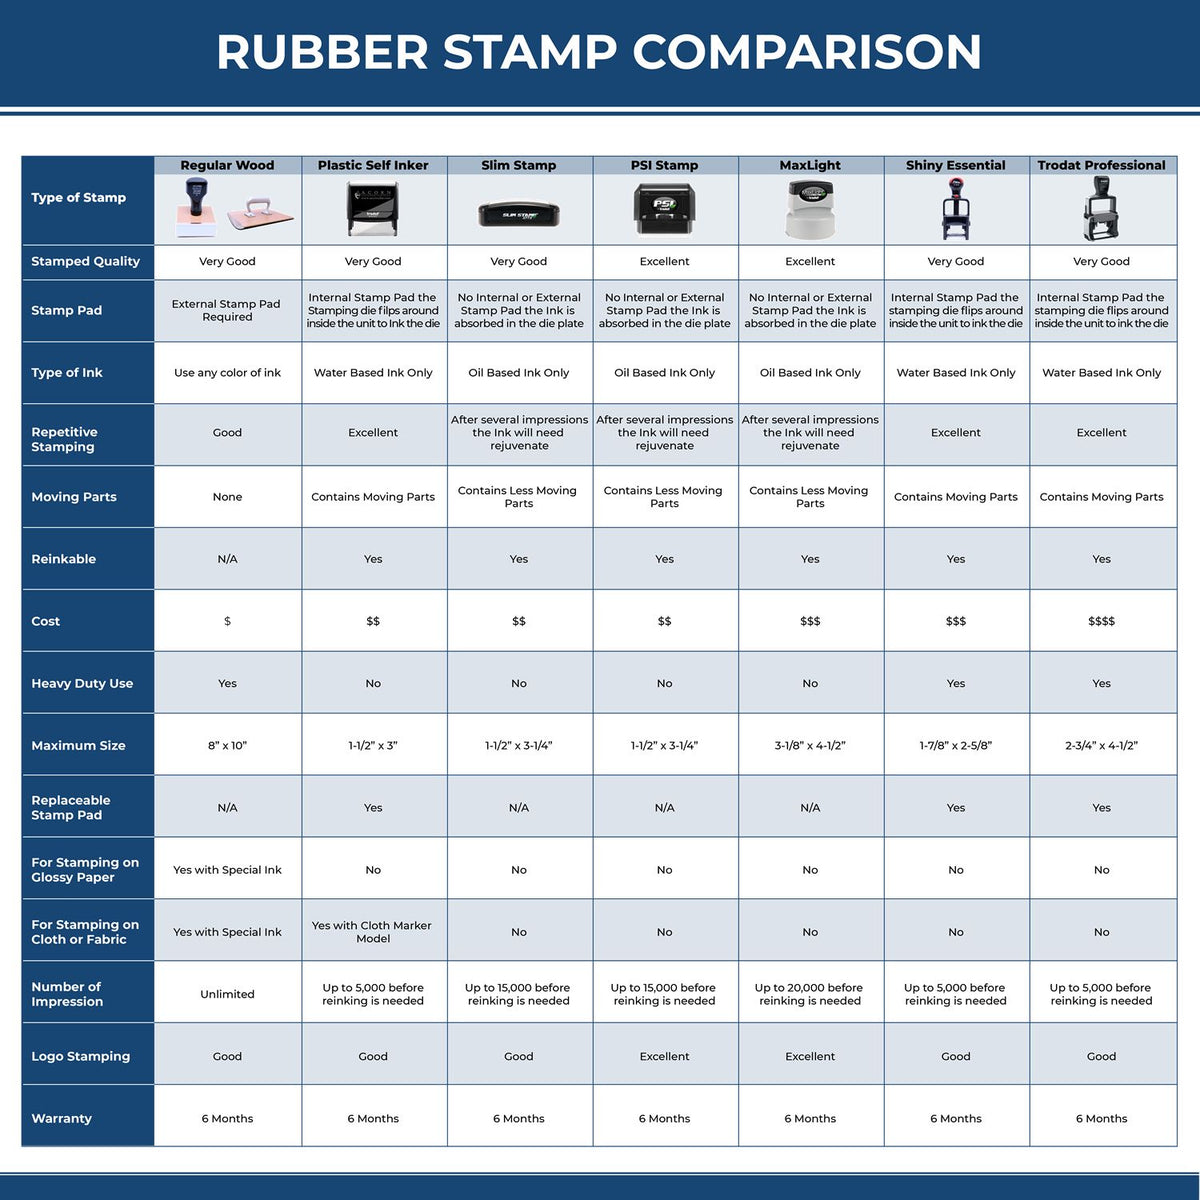 A comparison chart for the different types of mount models available for the Washington Landscape Architectural Seal Stamp.